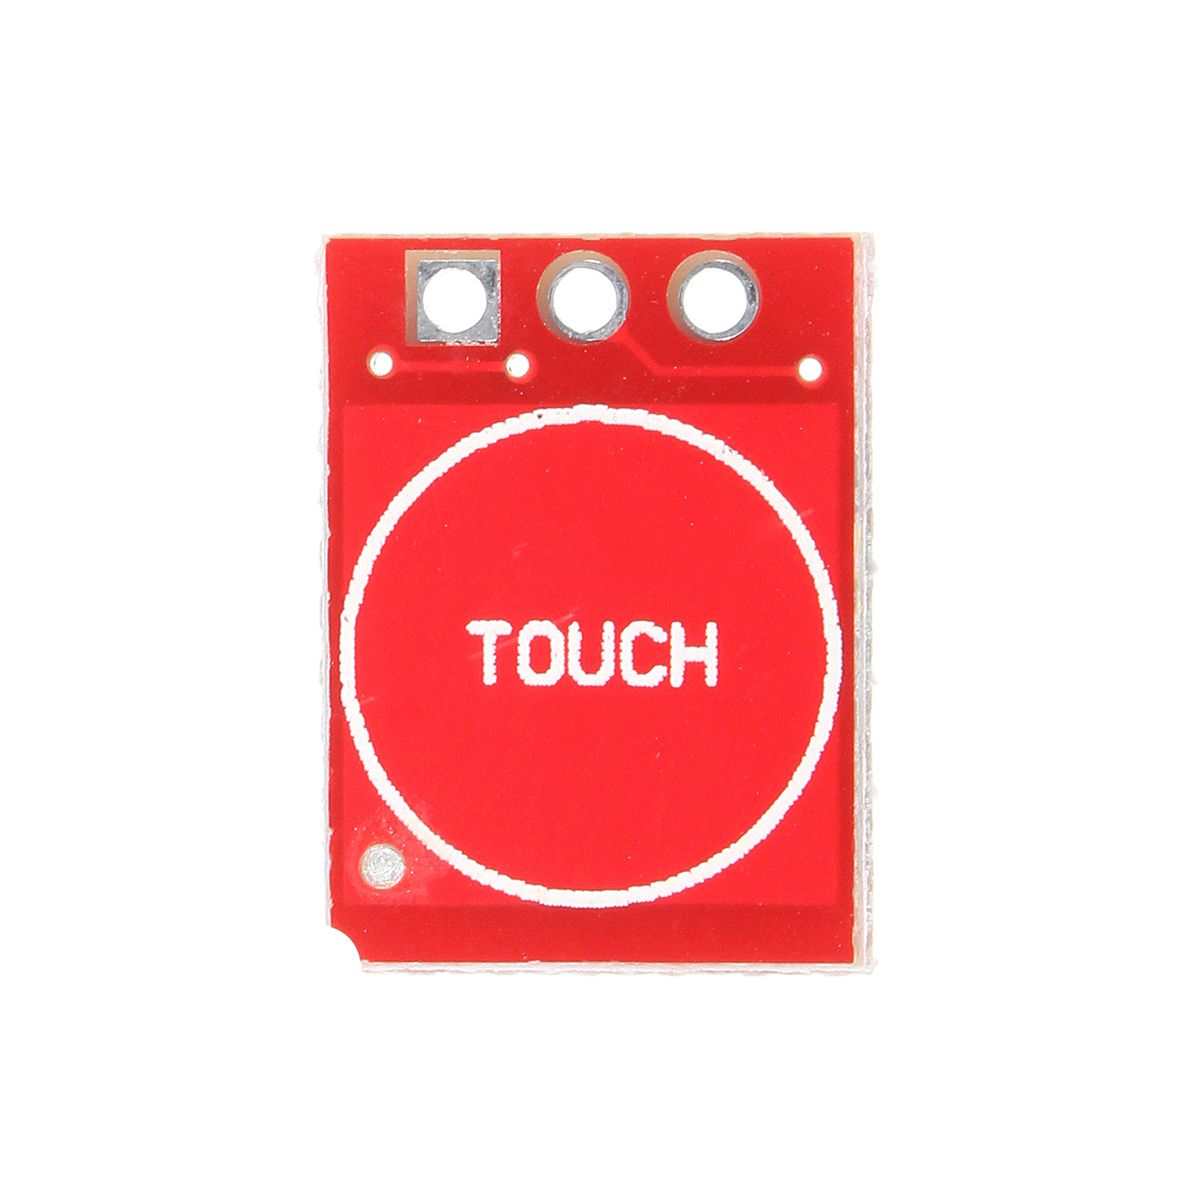 25-55V-TTP223-Capacitive-Touch-Switch-Button-Self-Lock-Module-1132664